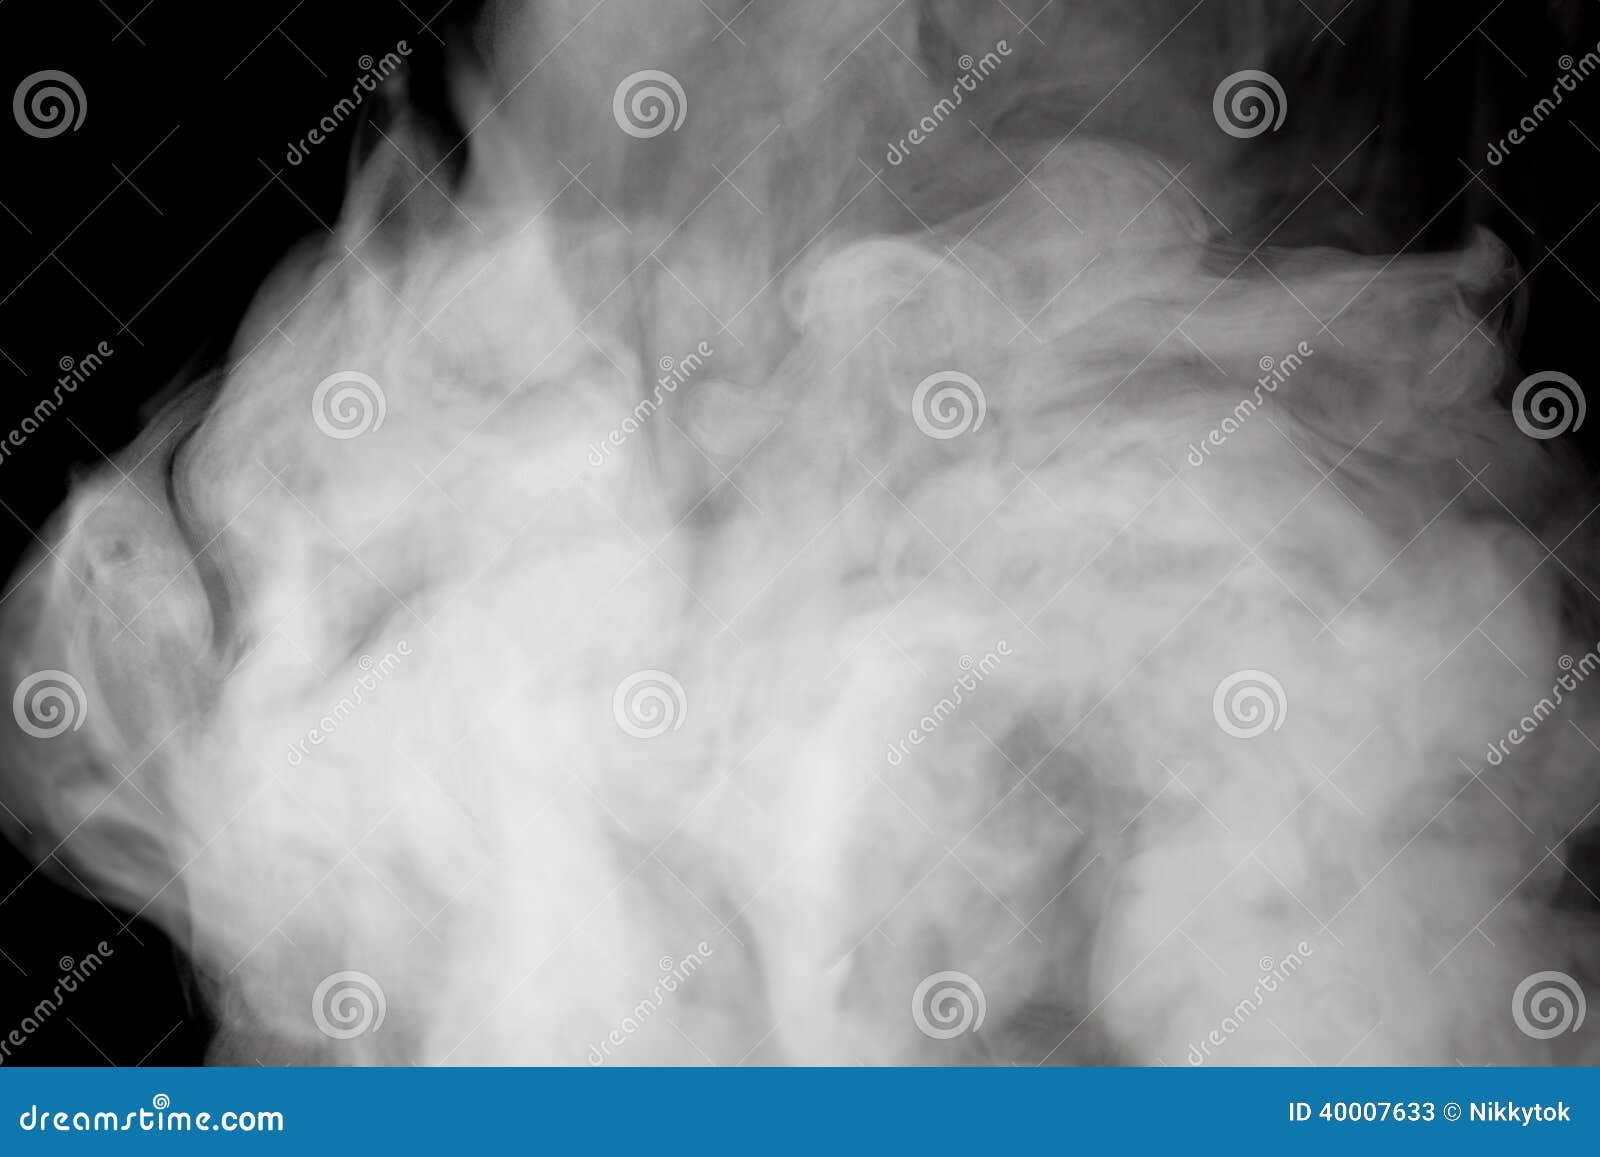 331,855 Abstract Steam Background Images, Stock Photos, 3D objects, &  Vectors